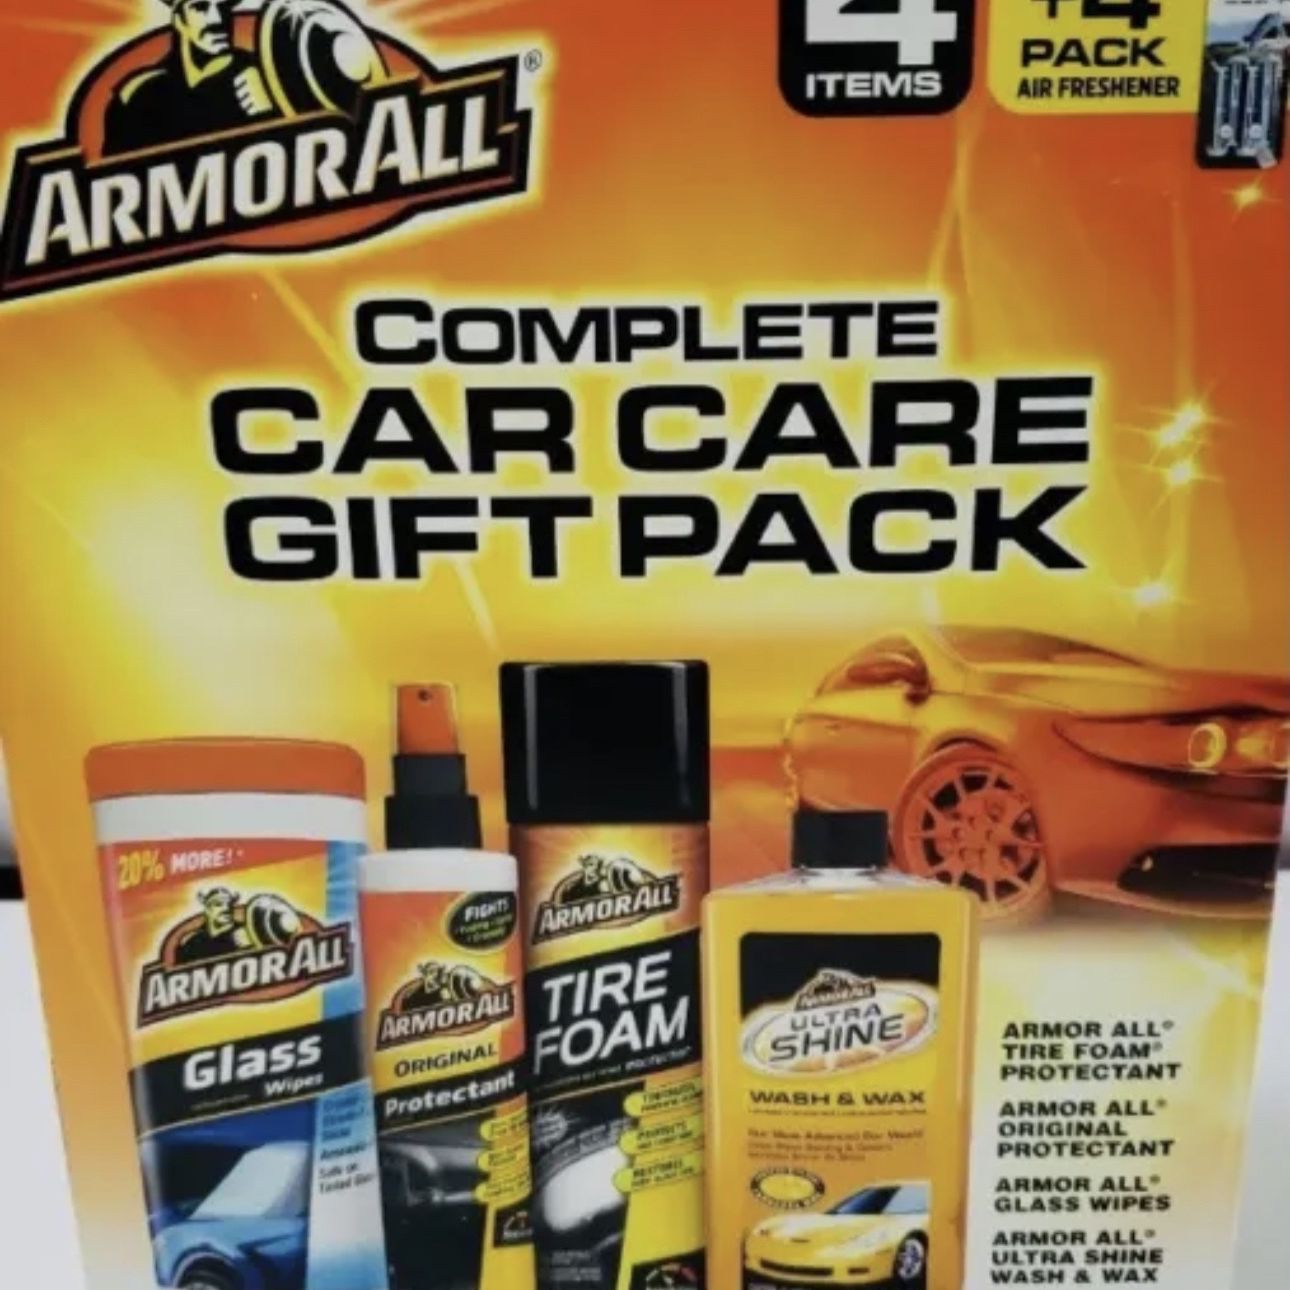 Armor All Glass Wipes, 30 ct